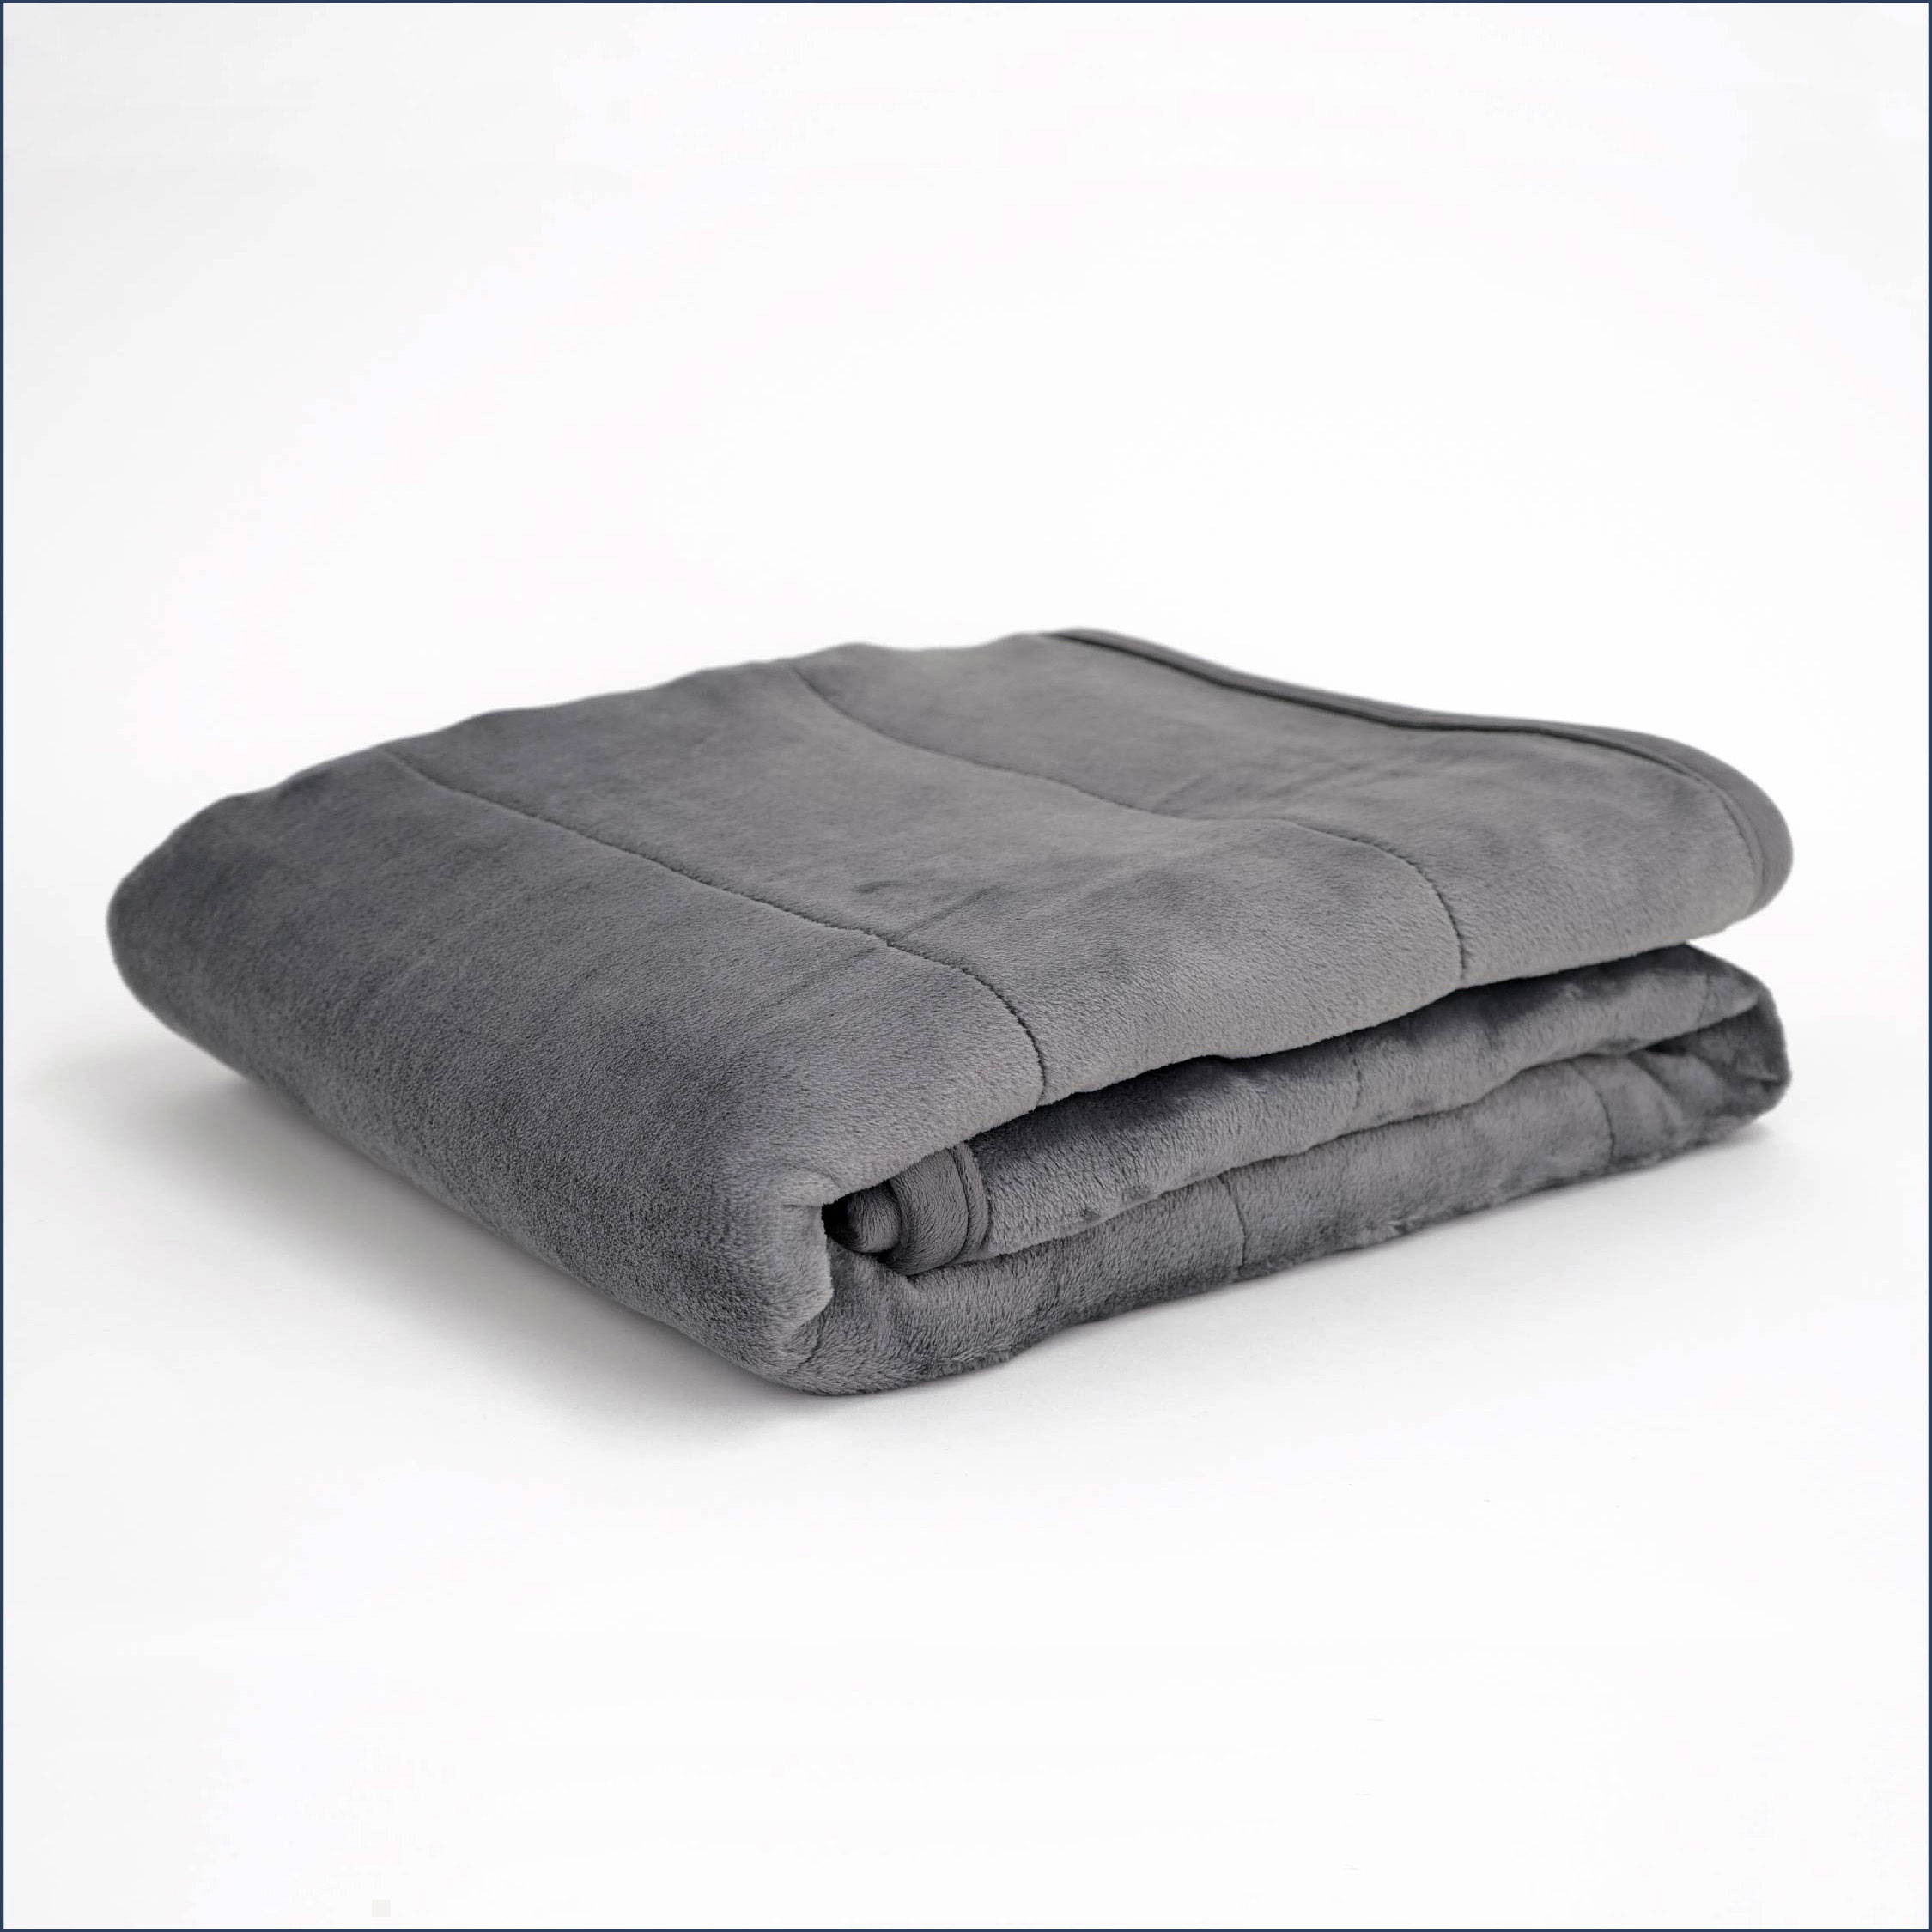 The Tuc Original Weighted Blanket folded on a white background